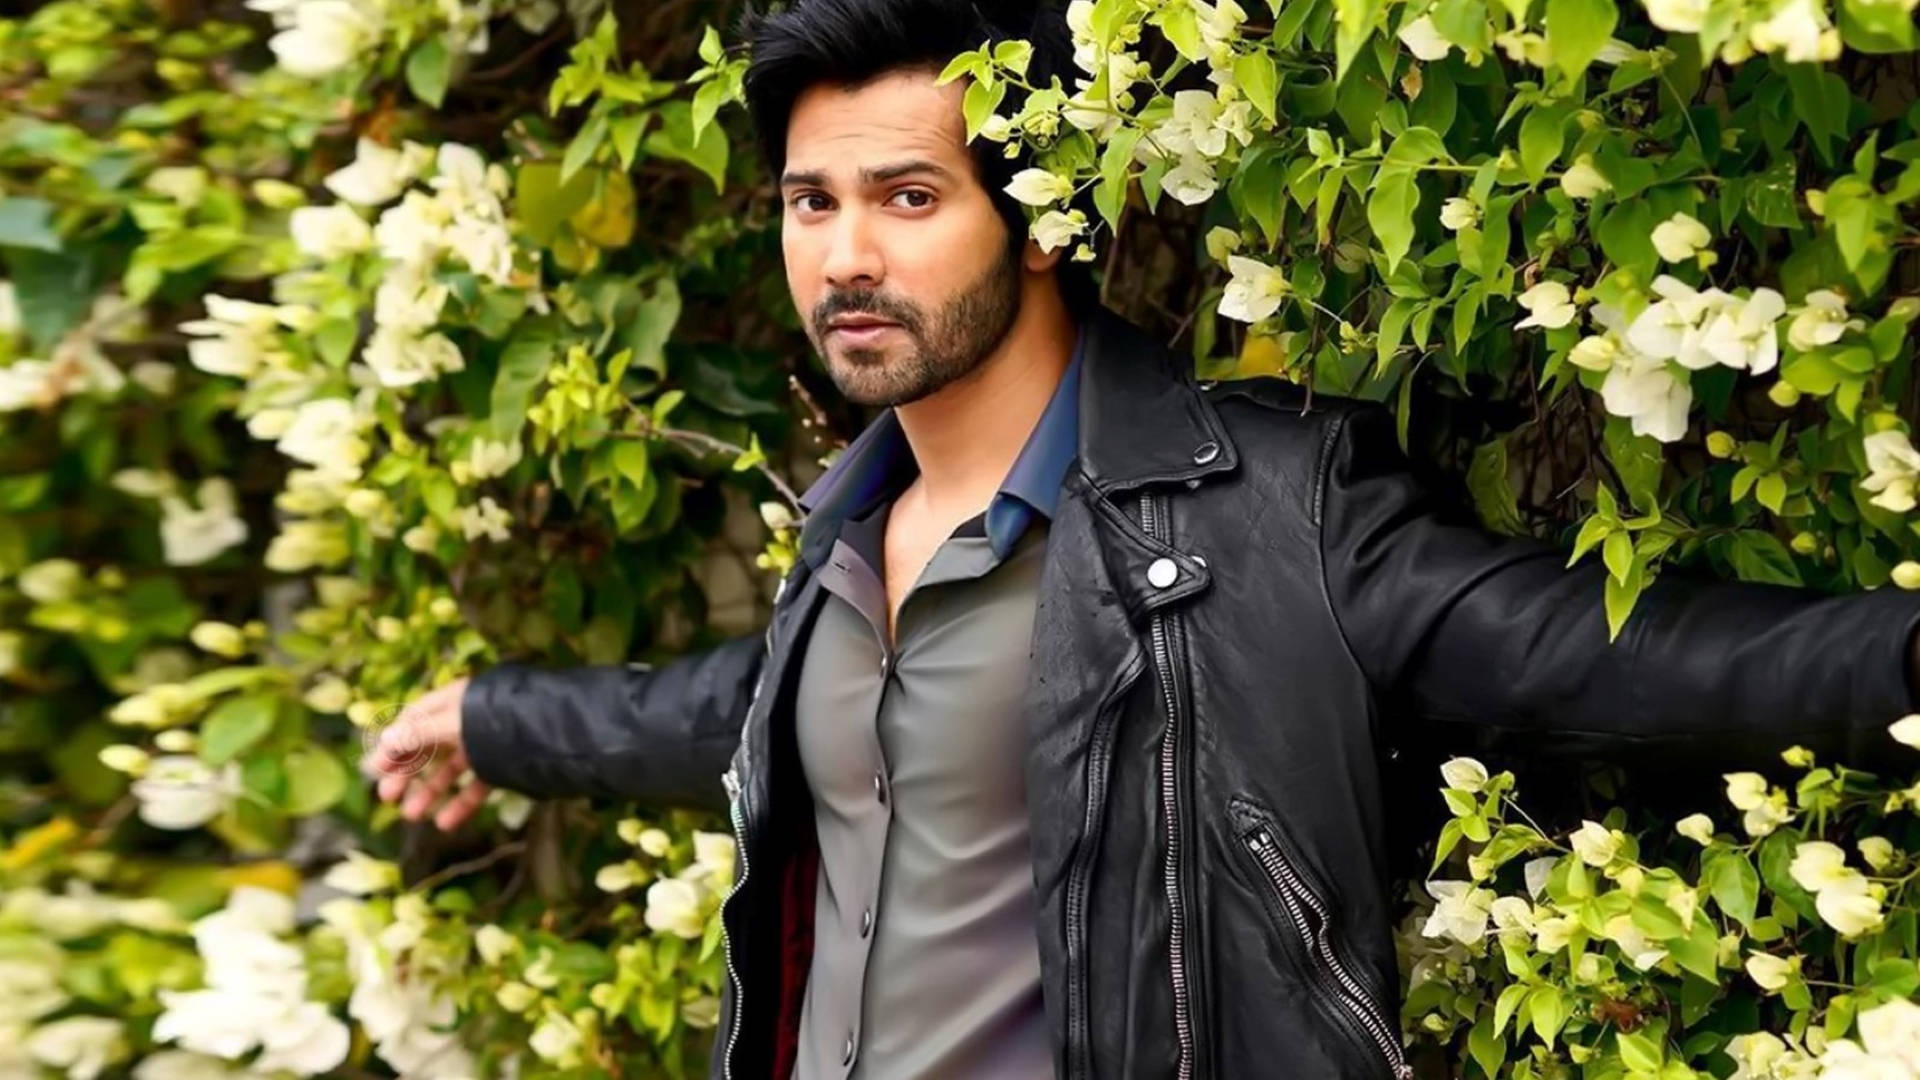 Varun Dhawan With Flowers Background